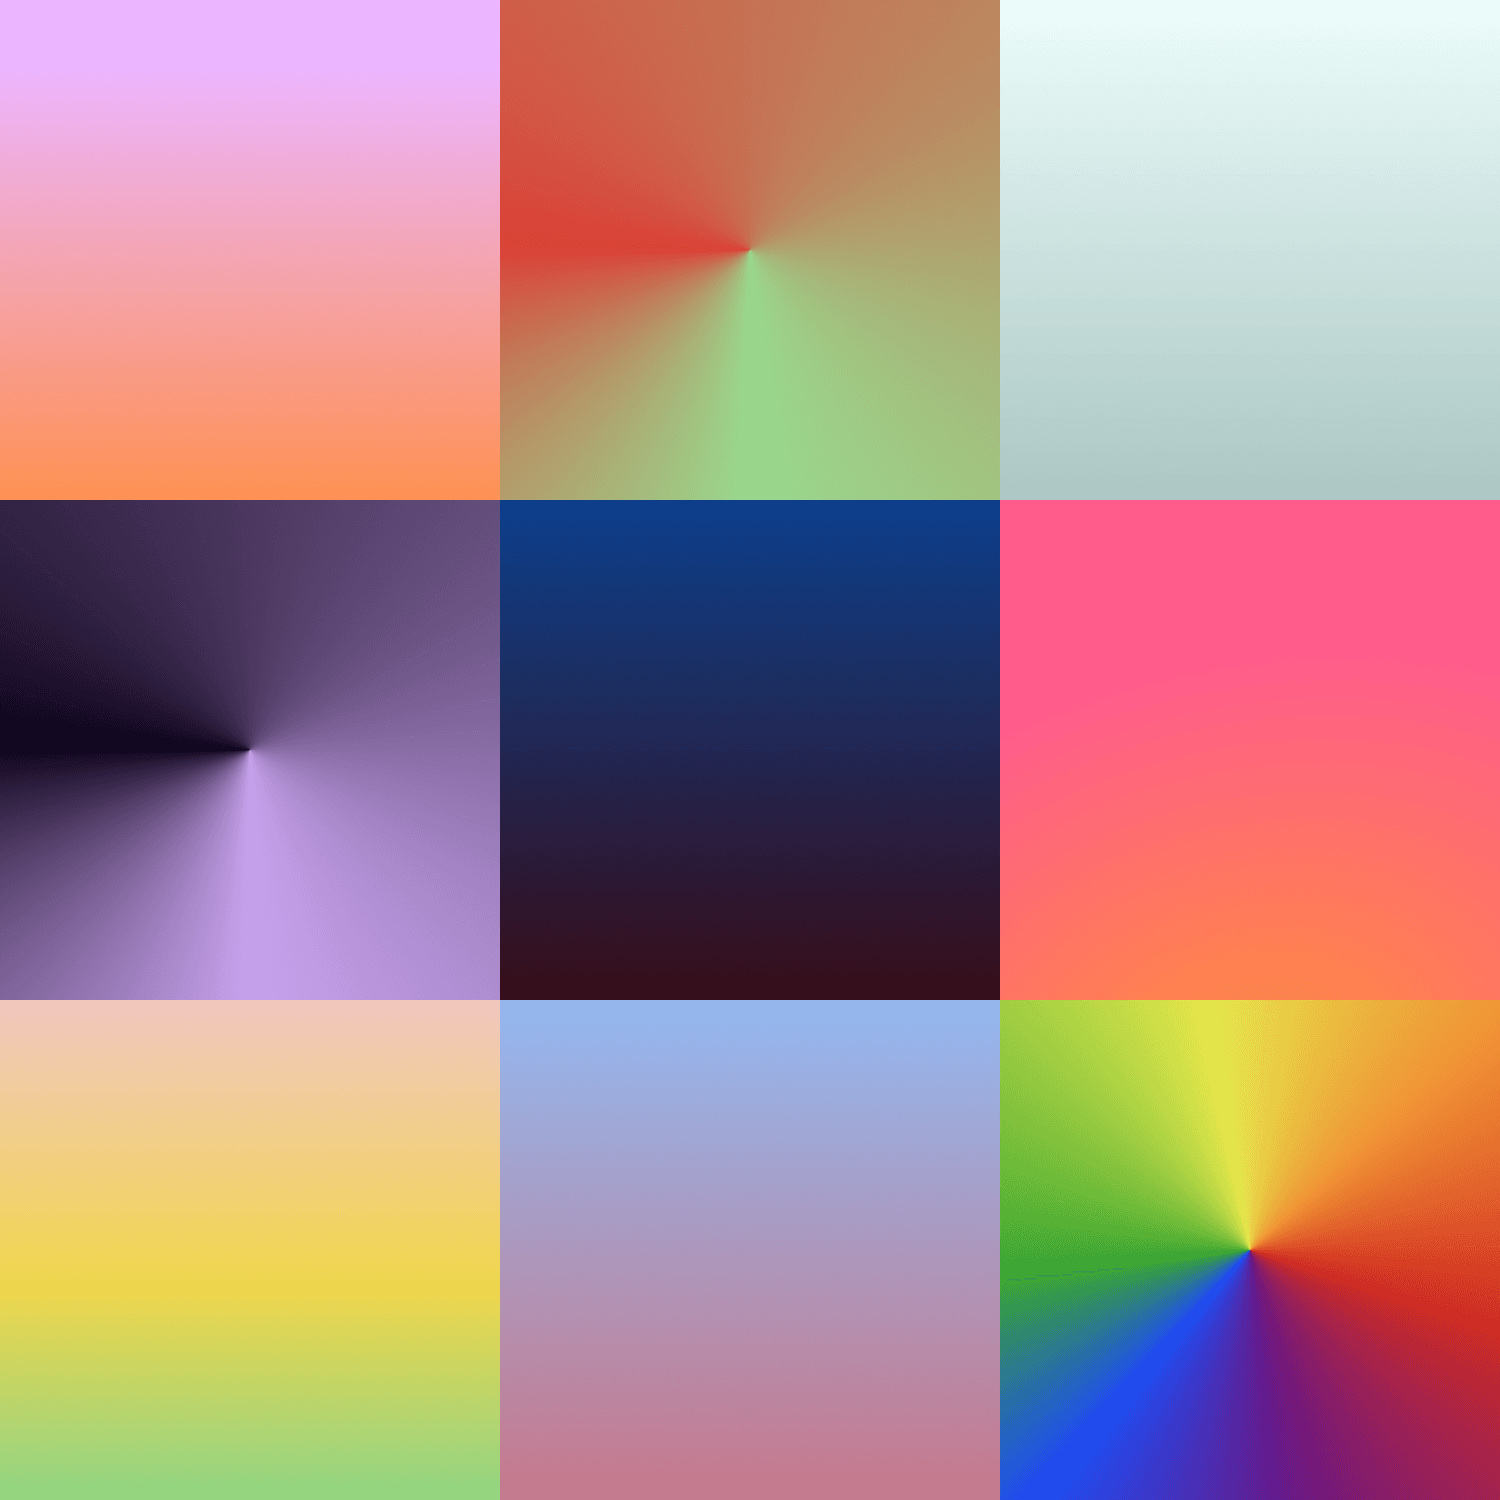 An image showing different background colors.